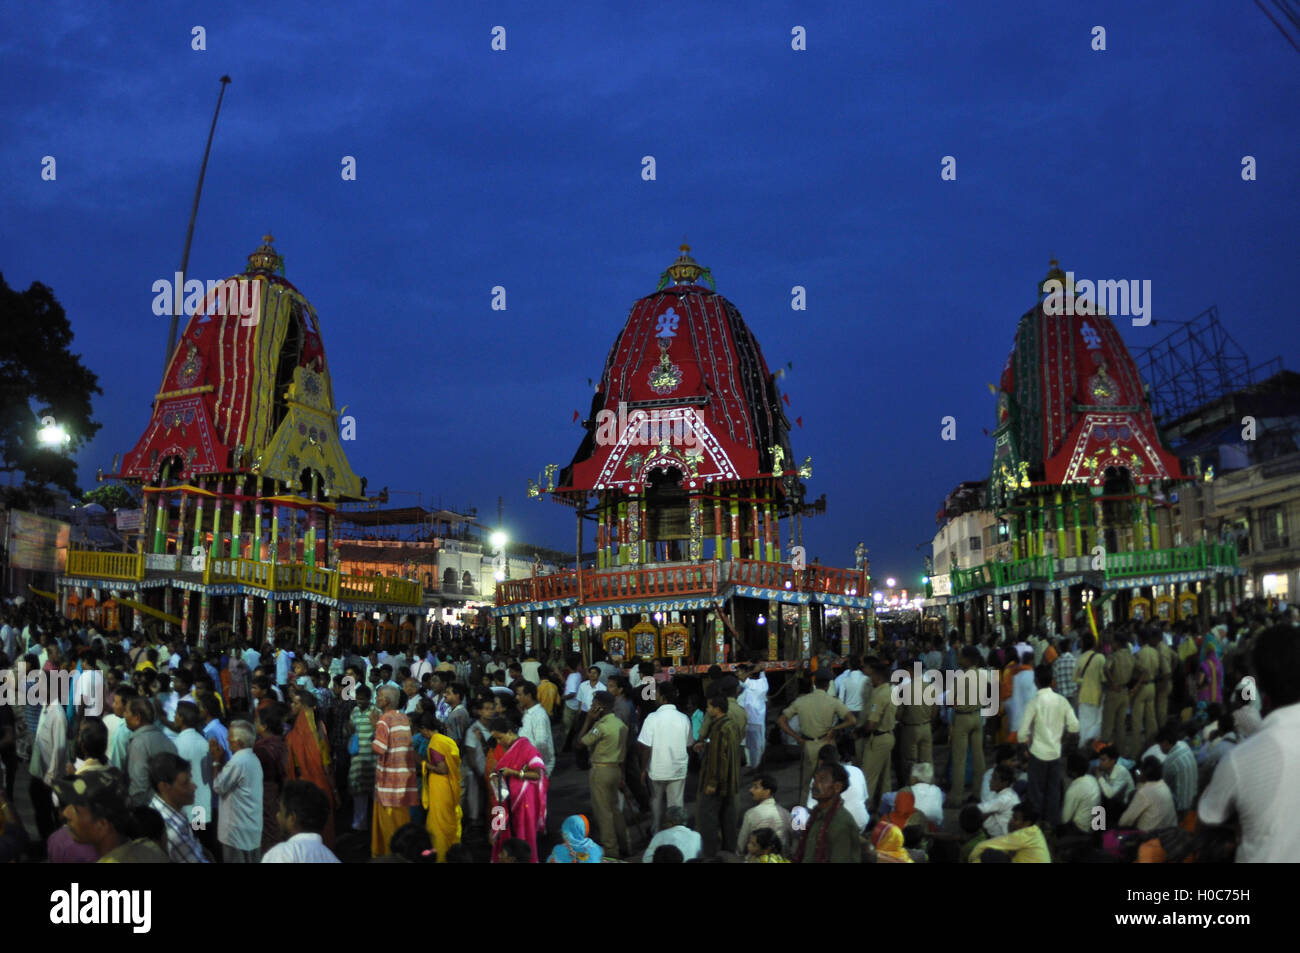 Puri, Odisha, India - July 3, 2011: The chariots of Lord Jagannath, Balbhadra and Subhadra  parked in front of Jagannath Temple. Stock Photo